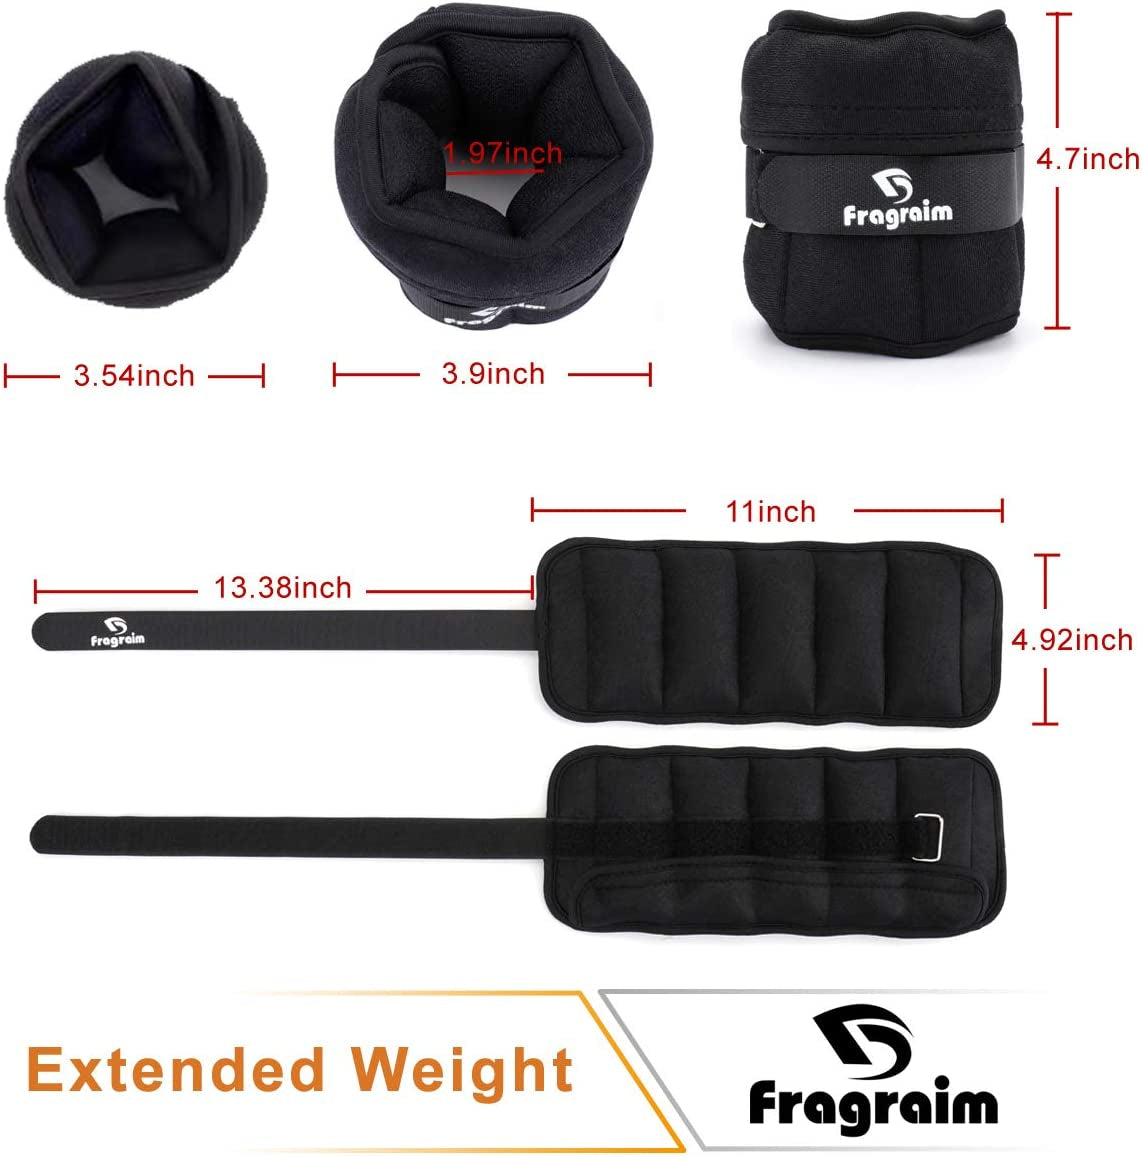 Adjustable Ankle Weights 1-3/4/5/6/8/10/12/15/20 LBS Pair with Removable Weight for Jogging, Gymnastics, Aerobics, Physical Therapy